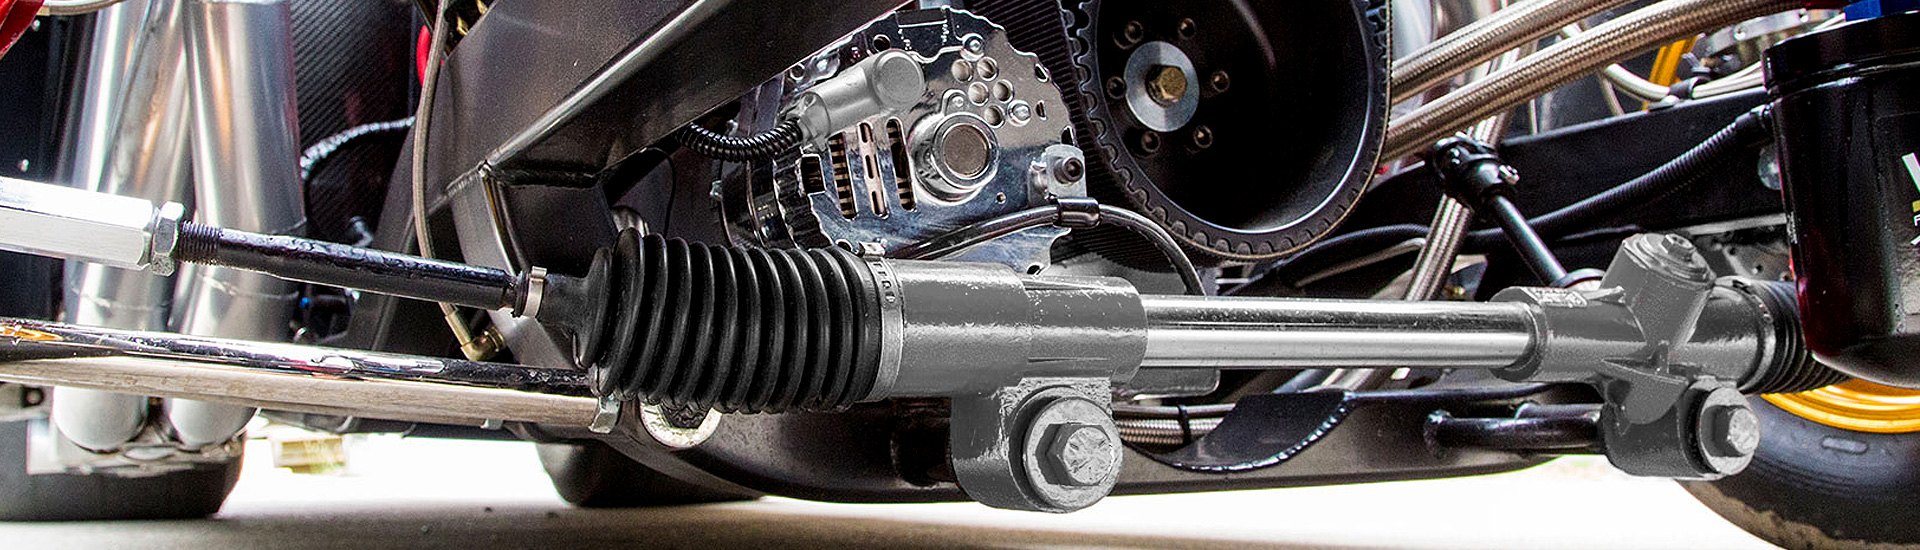 Do I Have a Steering Rack or a Steering Box Connected to My Wheel?